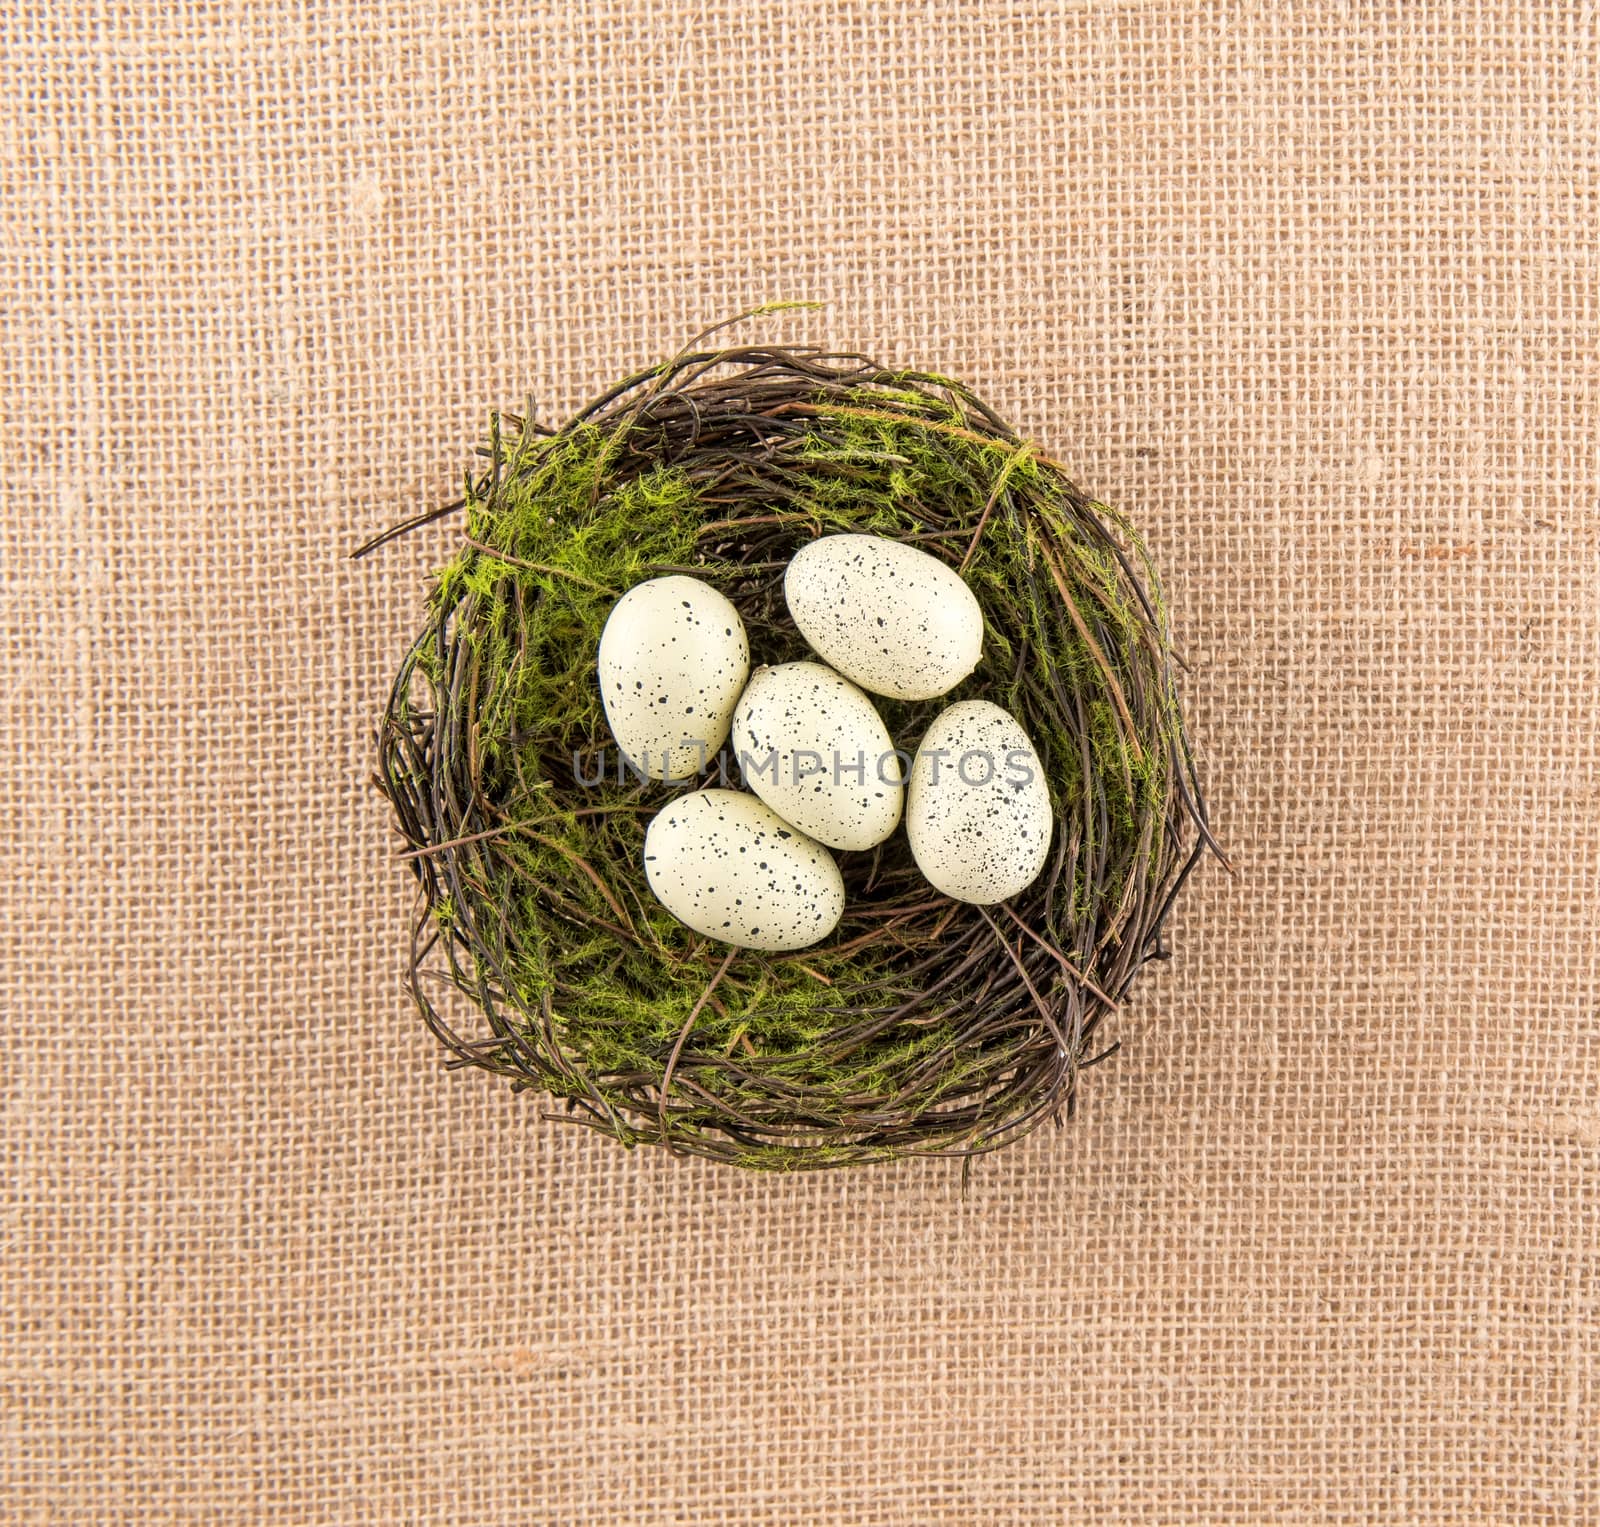 Ivory Speckled Eggs in Nest